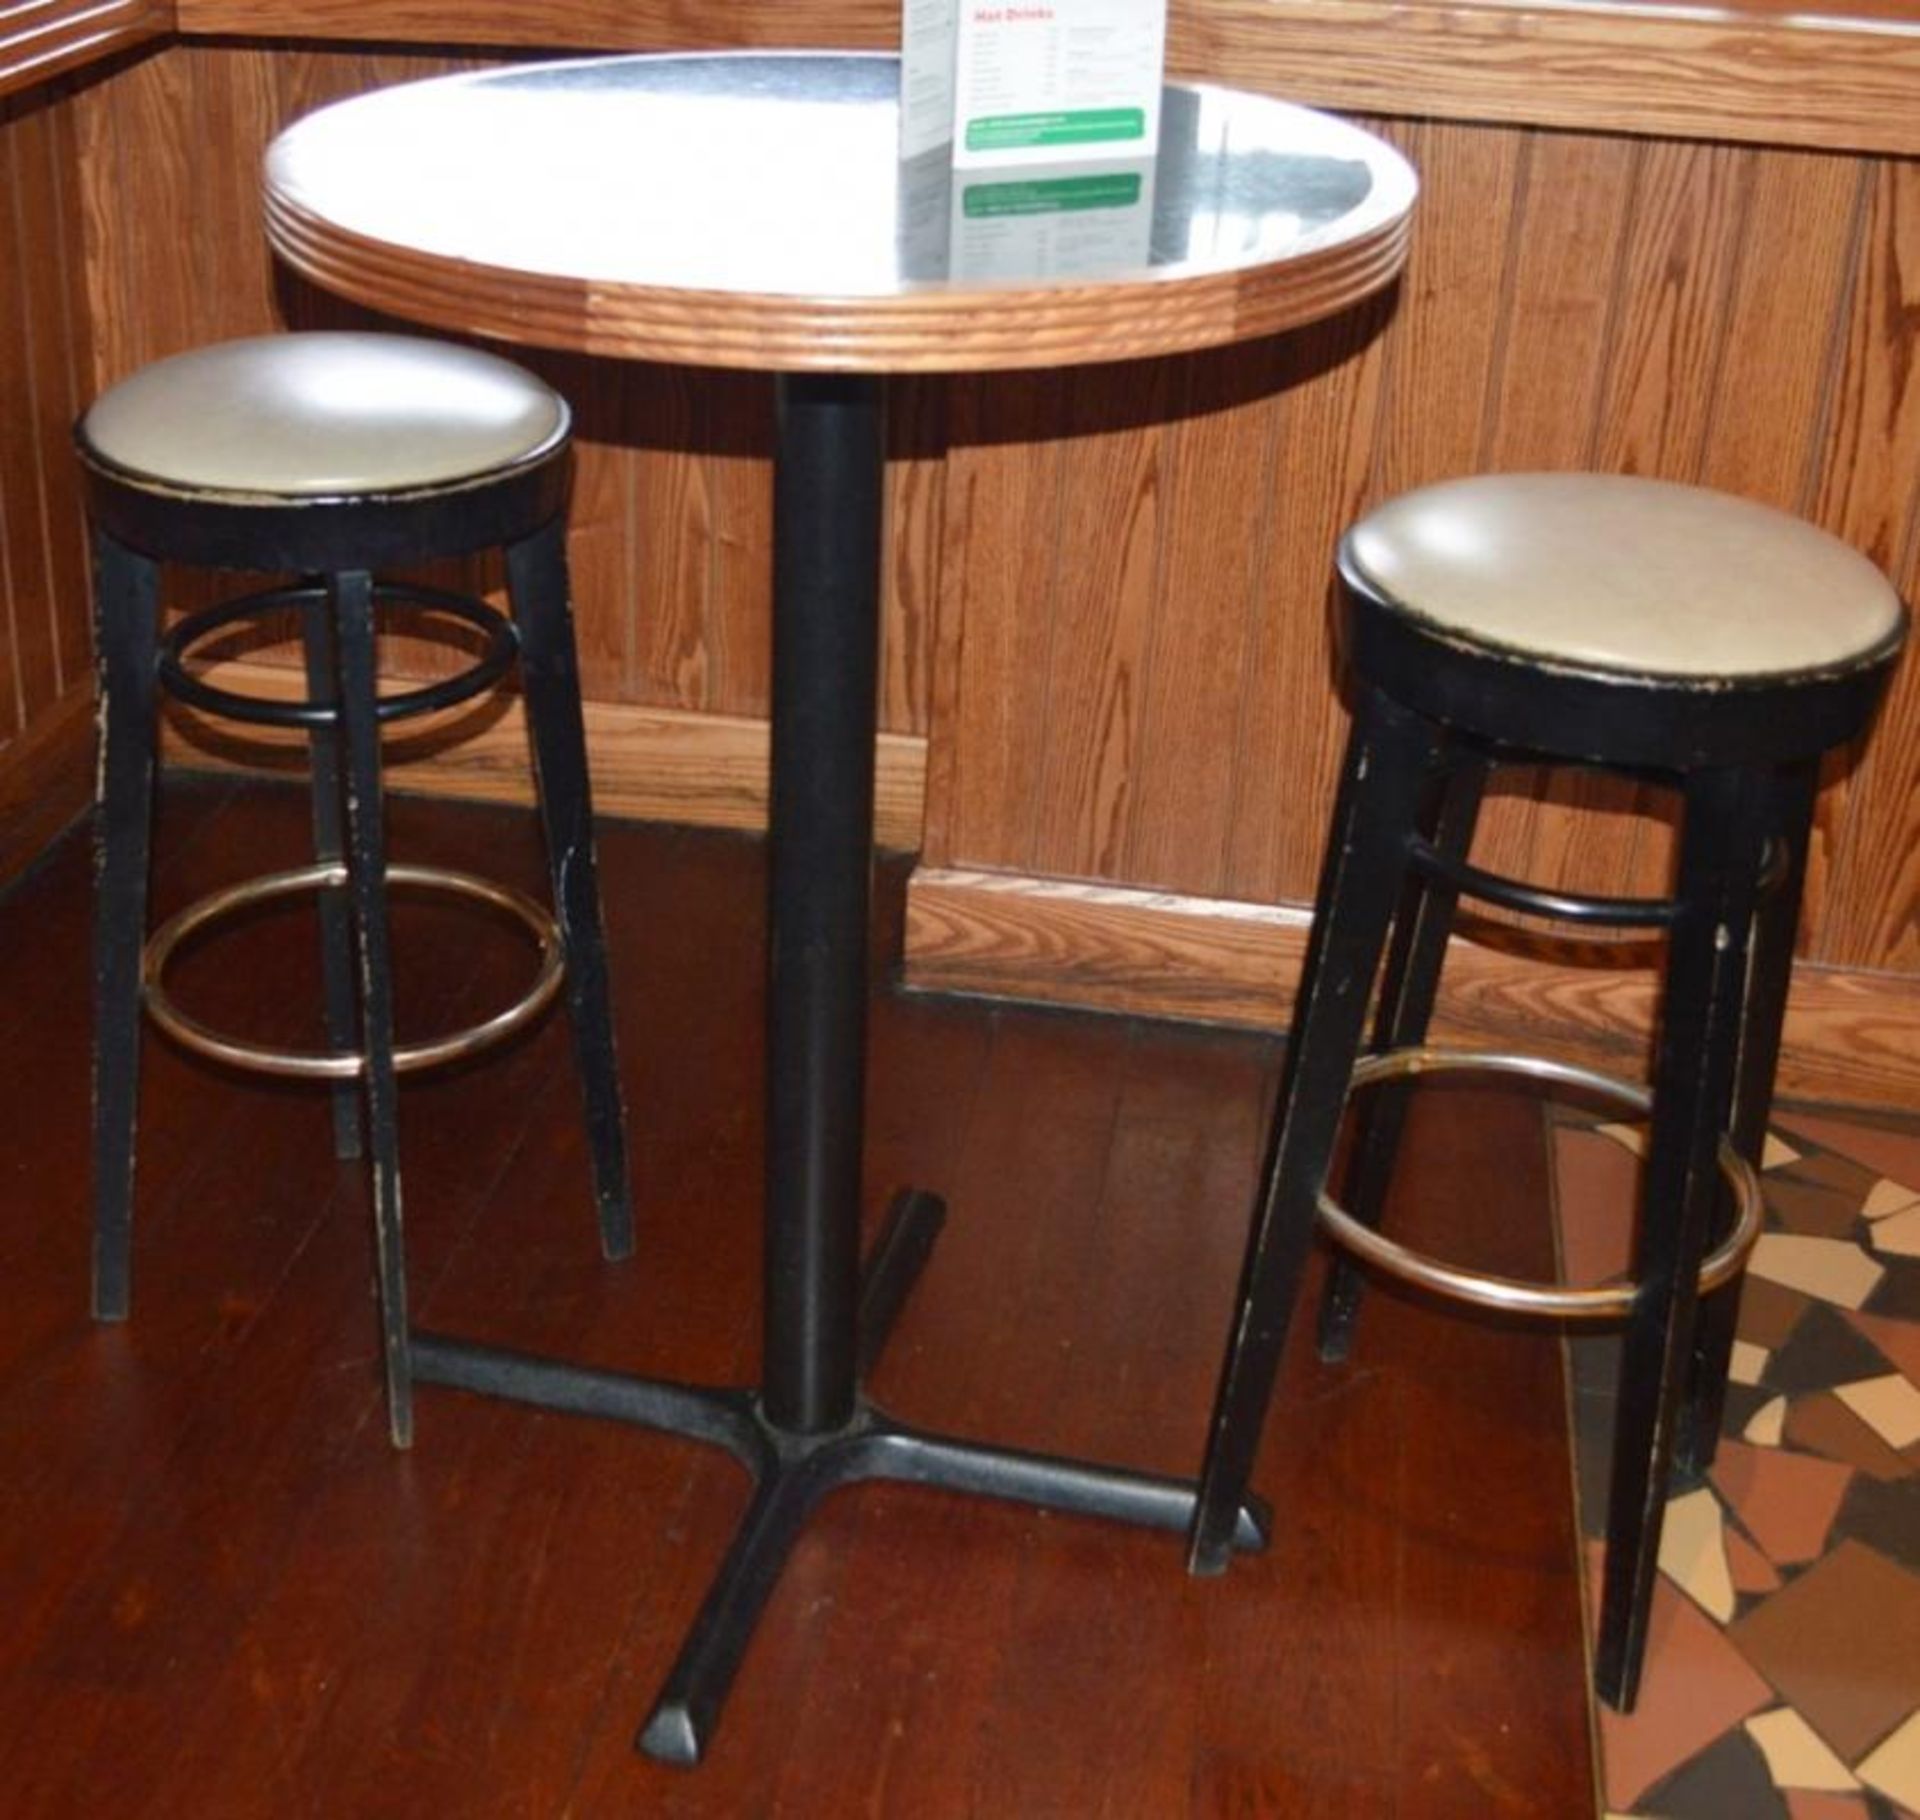 1 x Poser Bar Tables With Granite Effect Surface, Wooden Edging and Cast Iron Base - Includes Two Ba